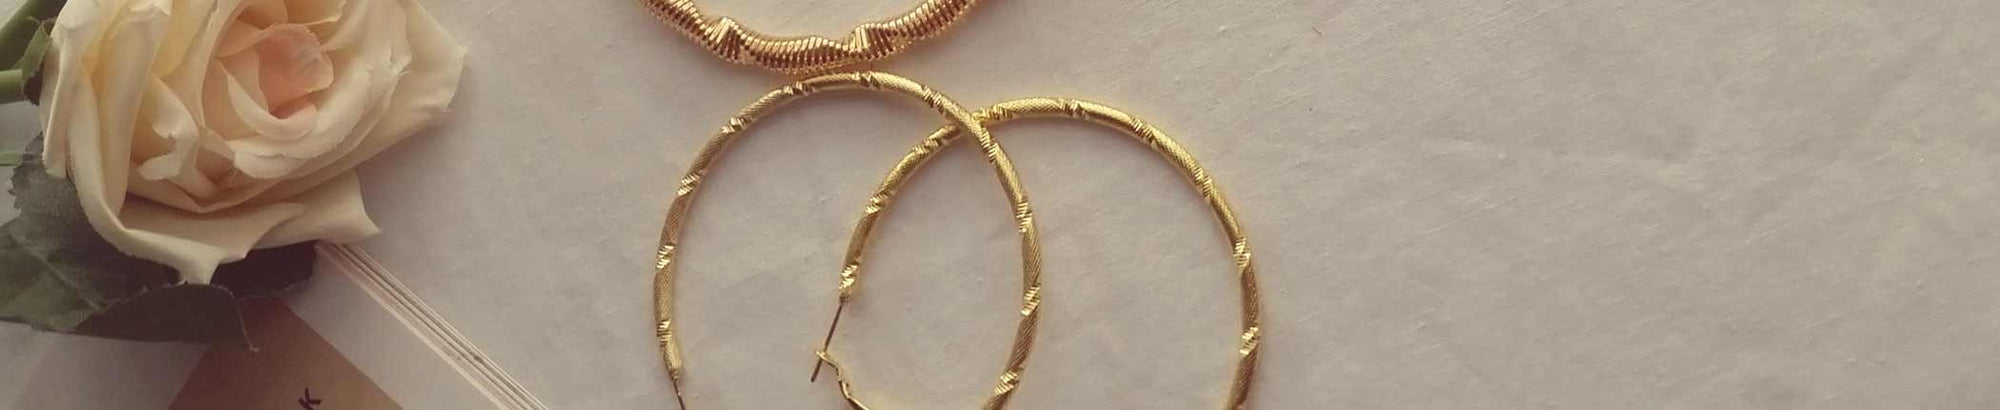 Reveal gold hoop earrings that suit you: Take the Quiz to find out!